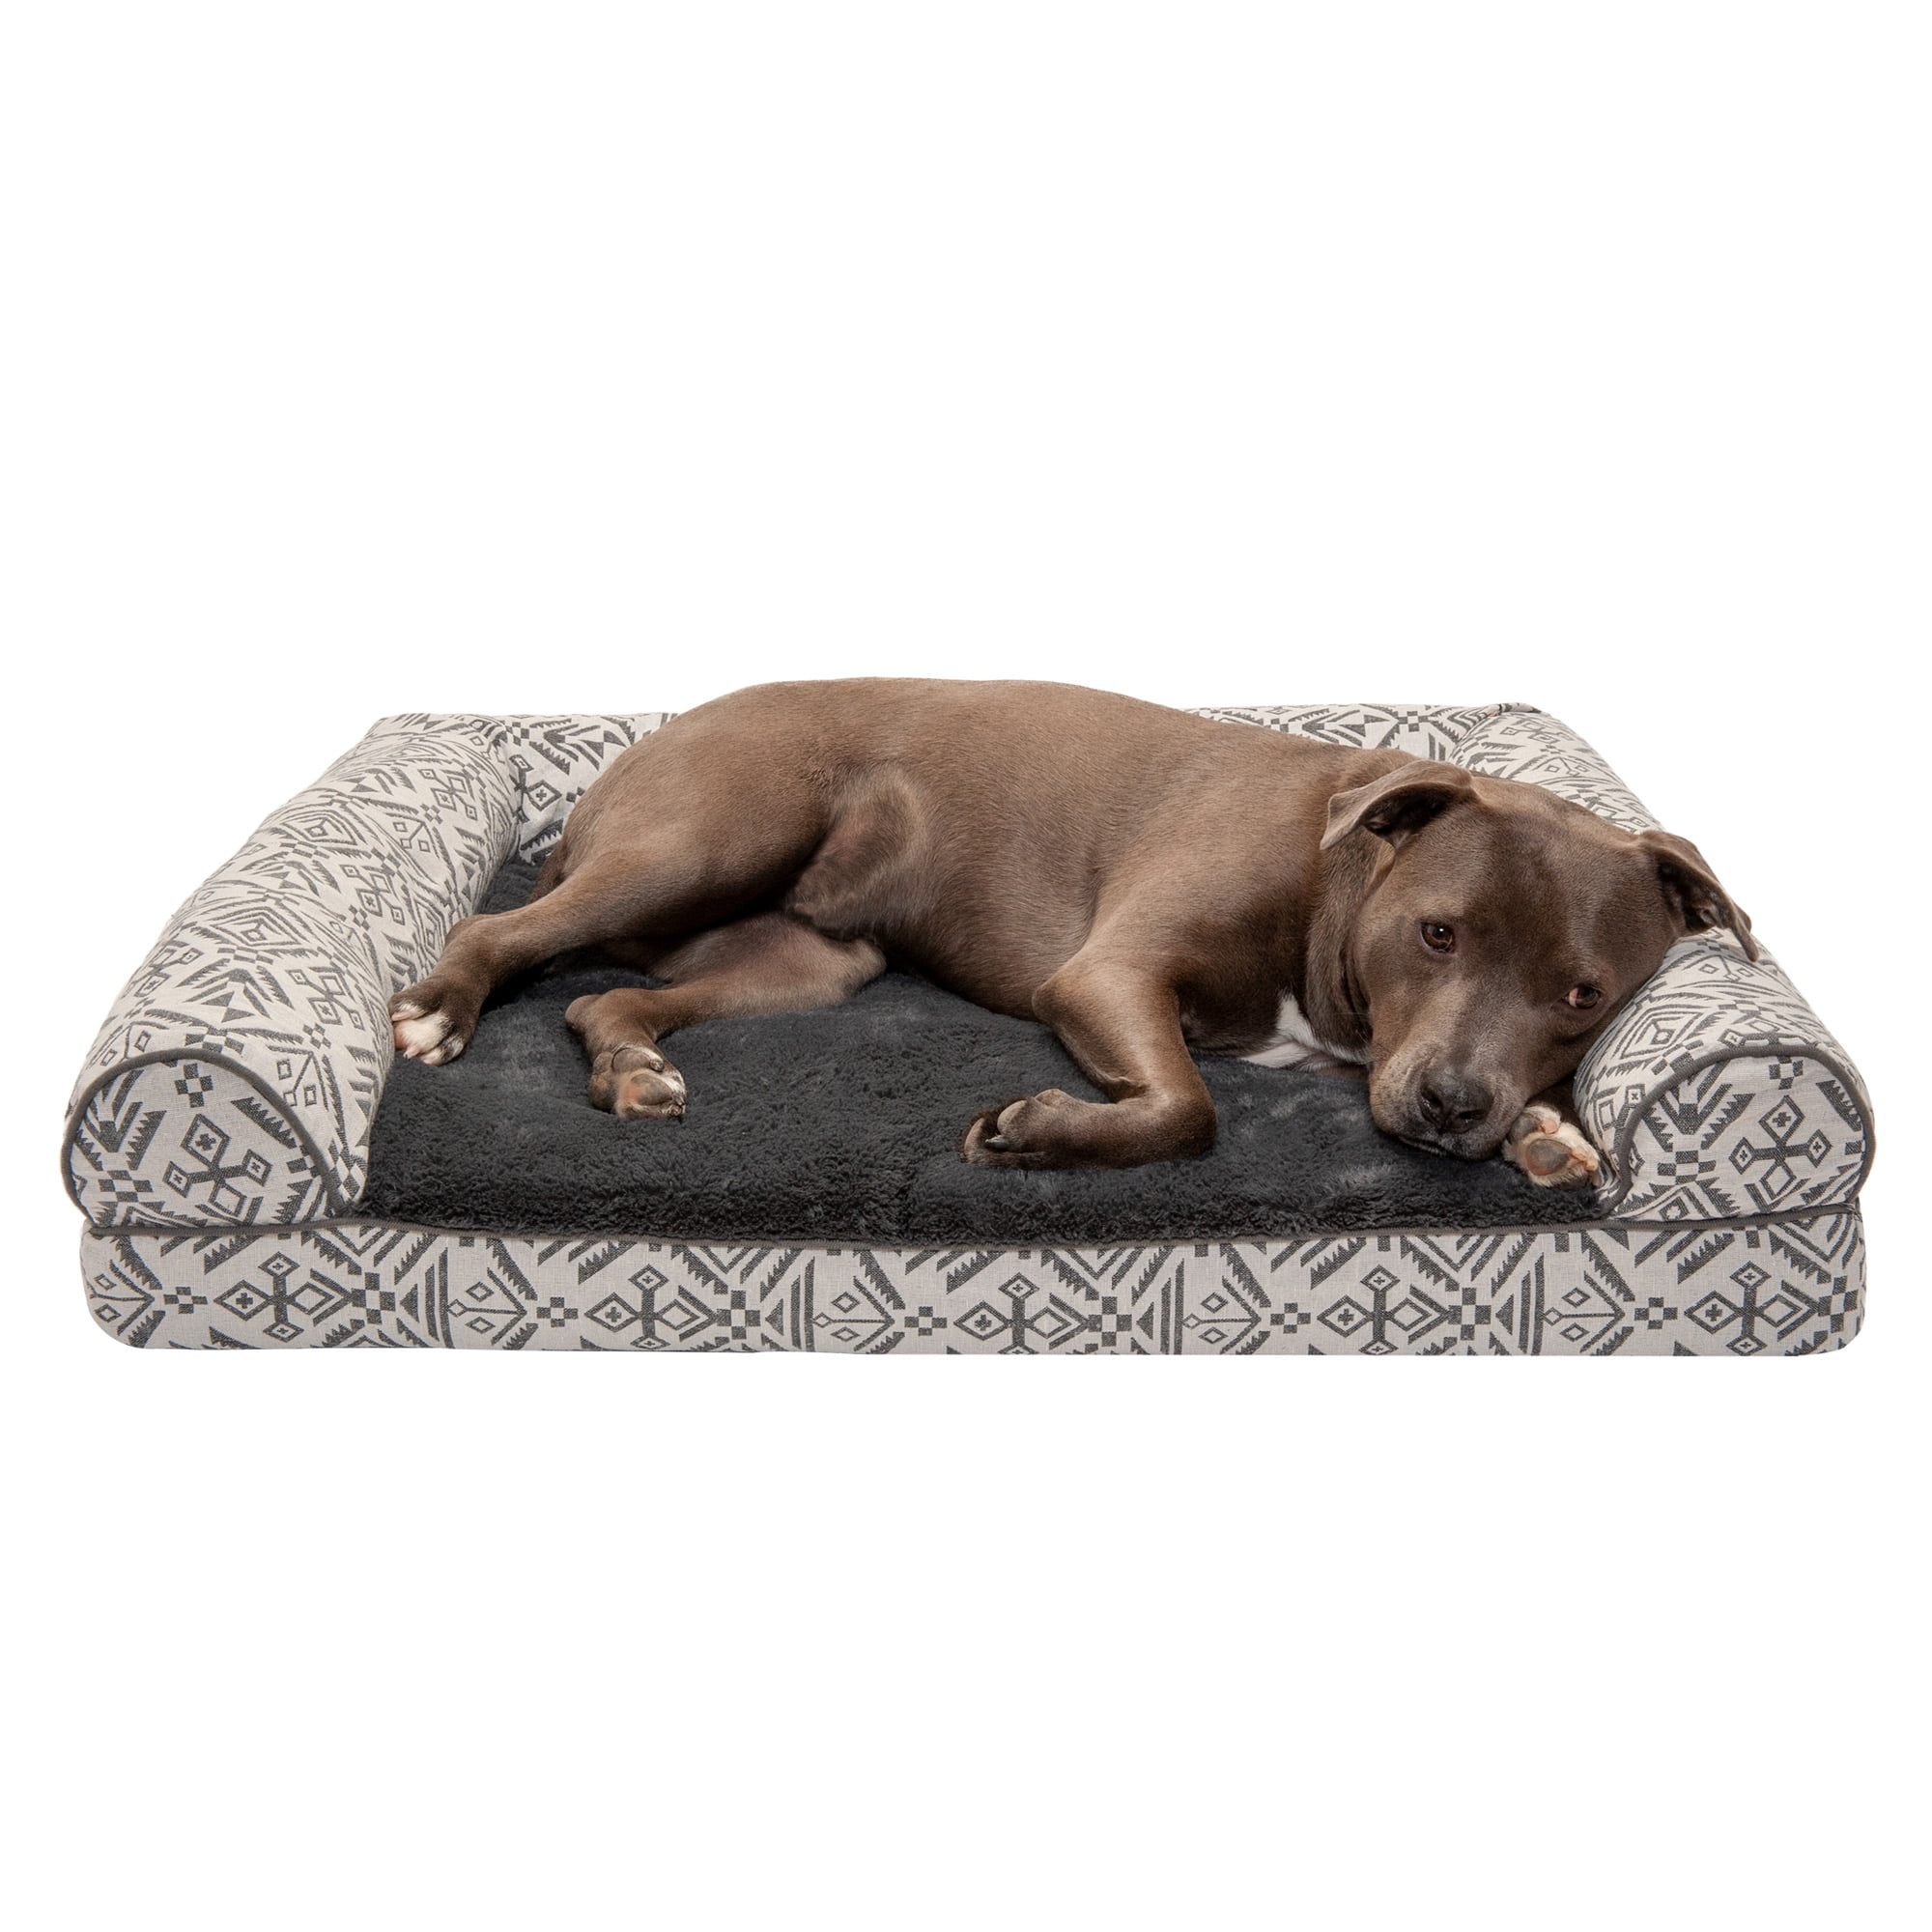 Iconic Pet Sassy Paws Multipurpose Wooden Pet Bed with Feeder for